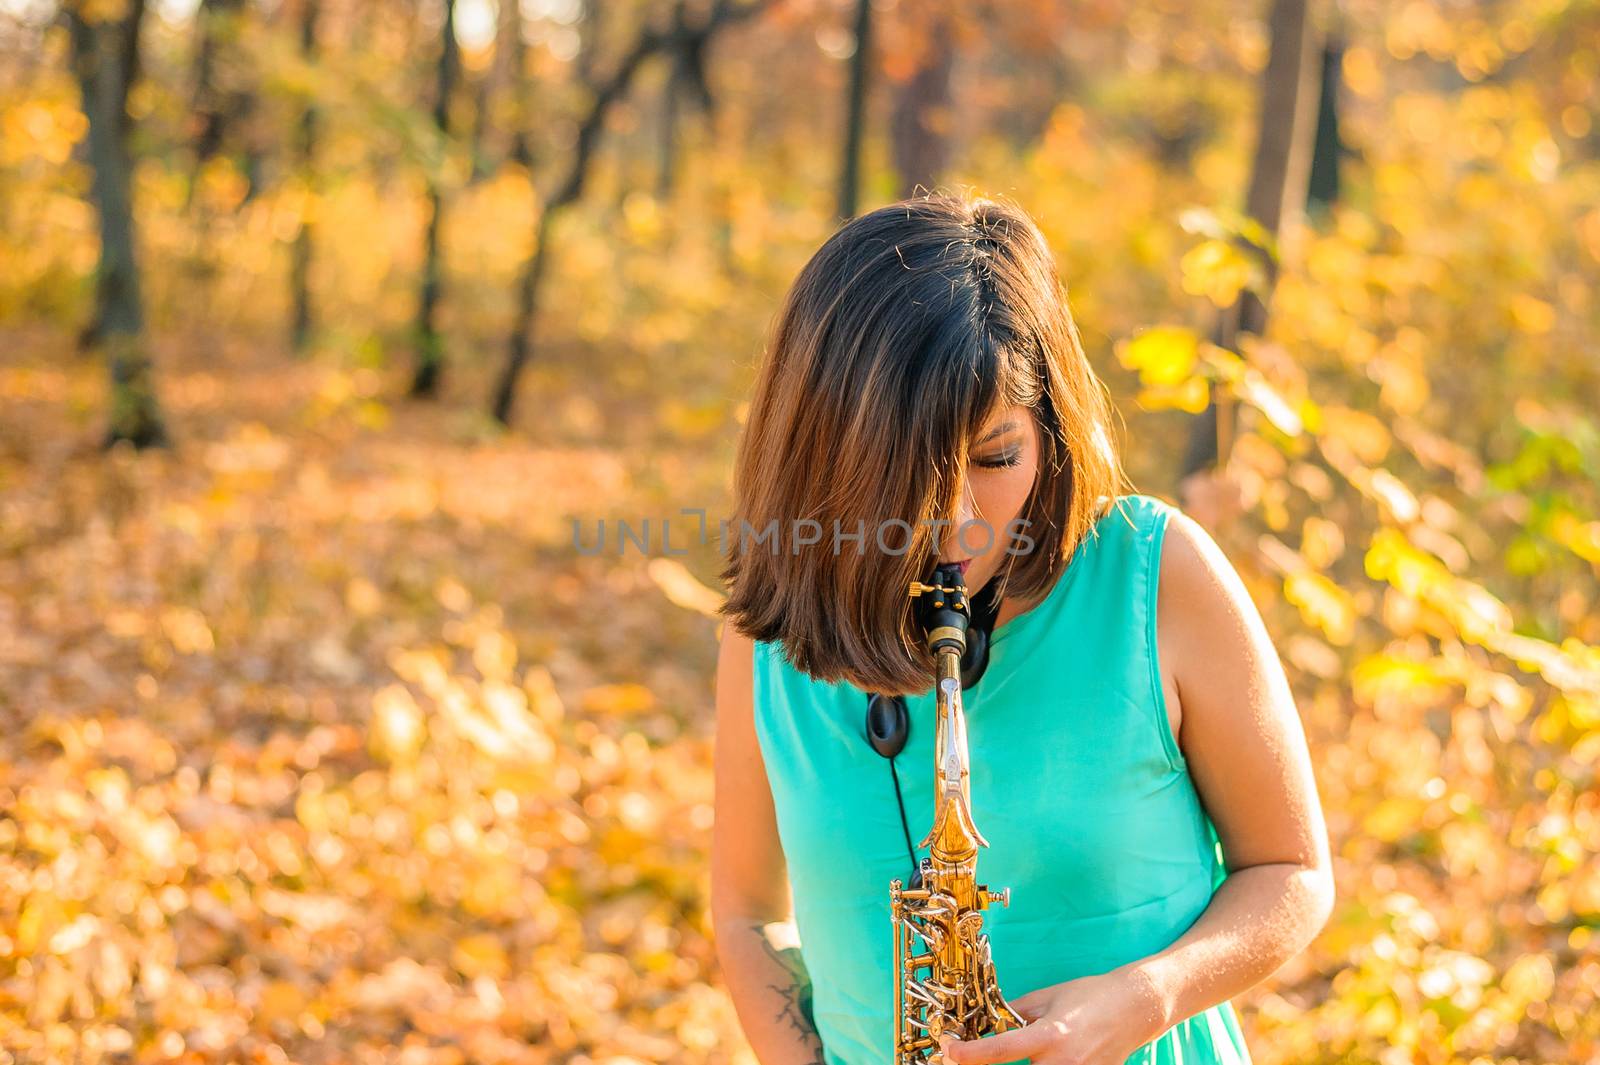 Young brunette girl with hair covering her face plays the saxophone, standing in blue clothes in a yellow autumn park